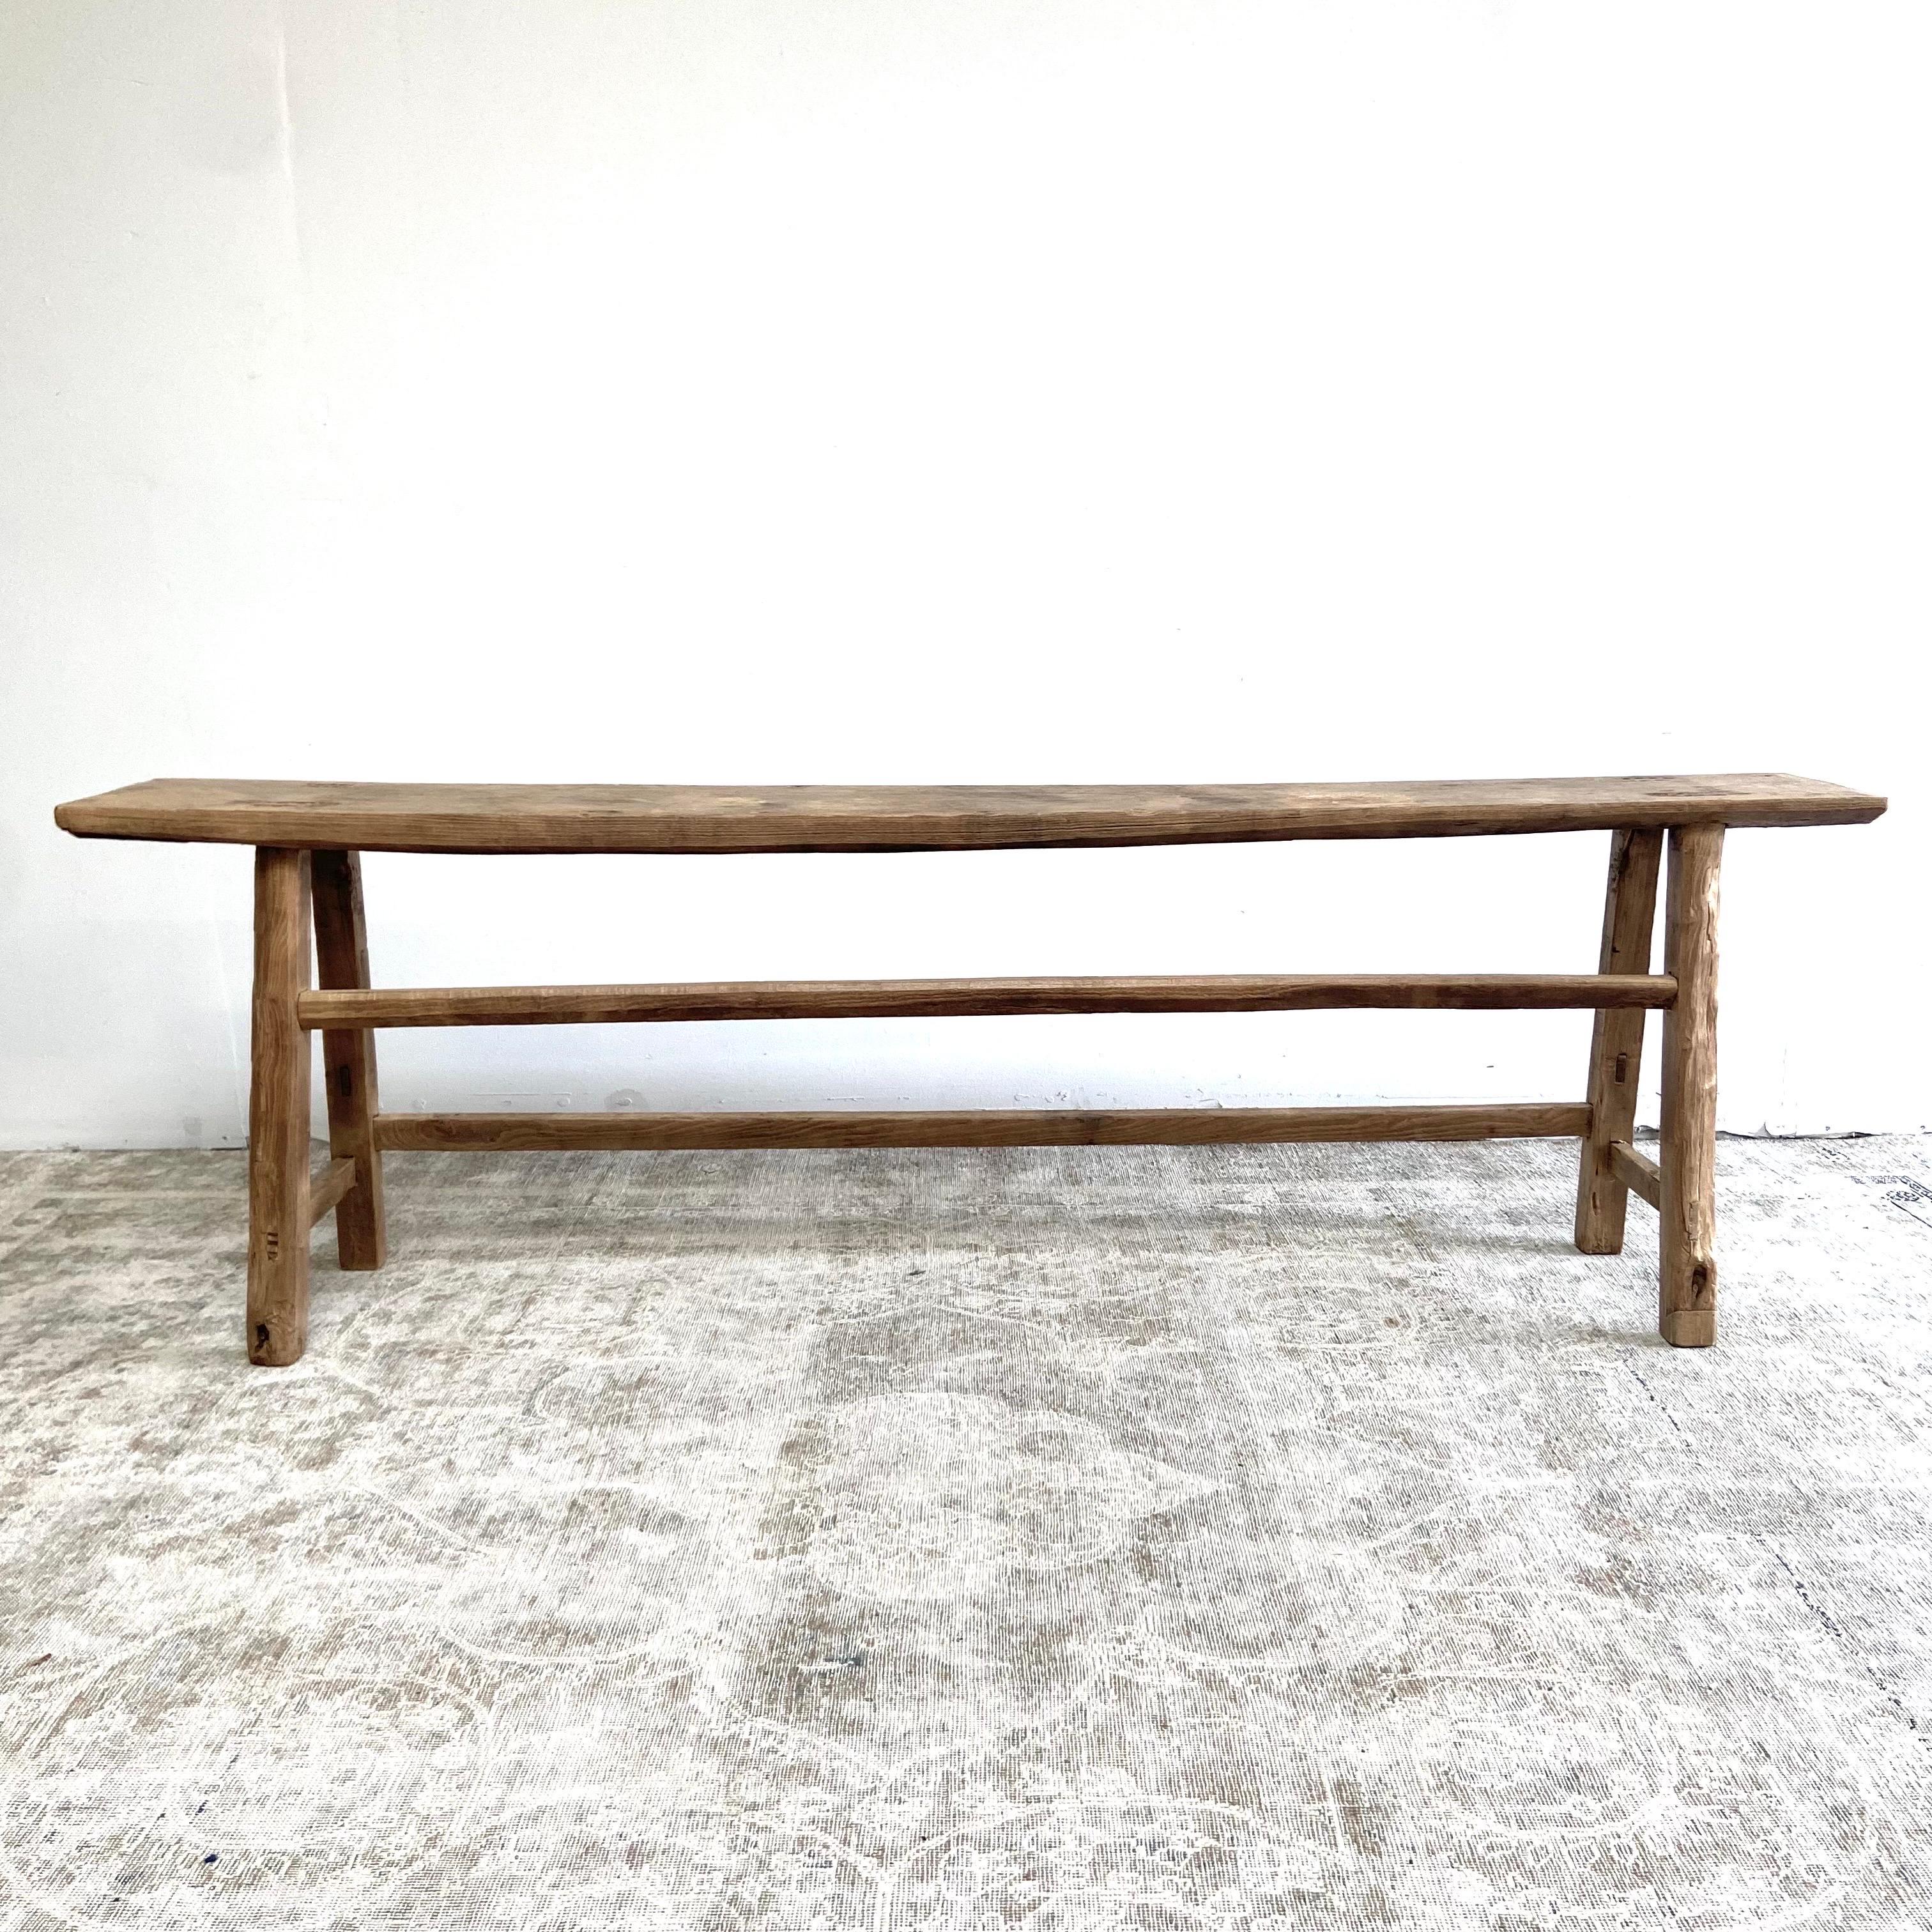 Vintage Antique Elm Wood Console Table Made from Vintage reclaimed elm wood. Beautiful antique patina, with weathering and age, these are solid and sturdy ready for daily use, use as an entry table, sofa table or console in a dining room. Great in a